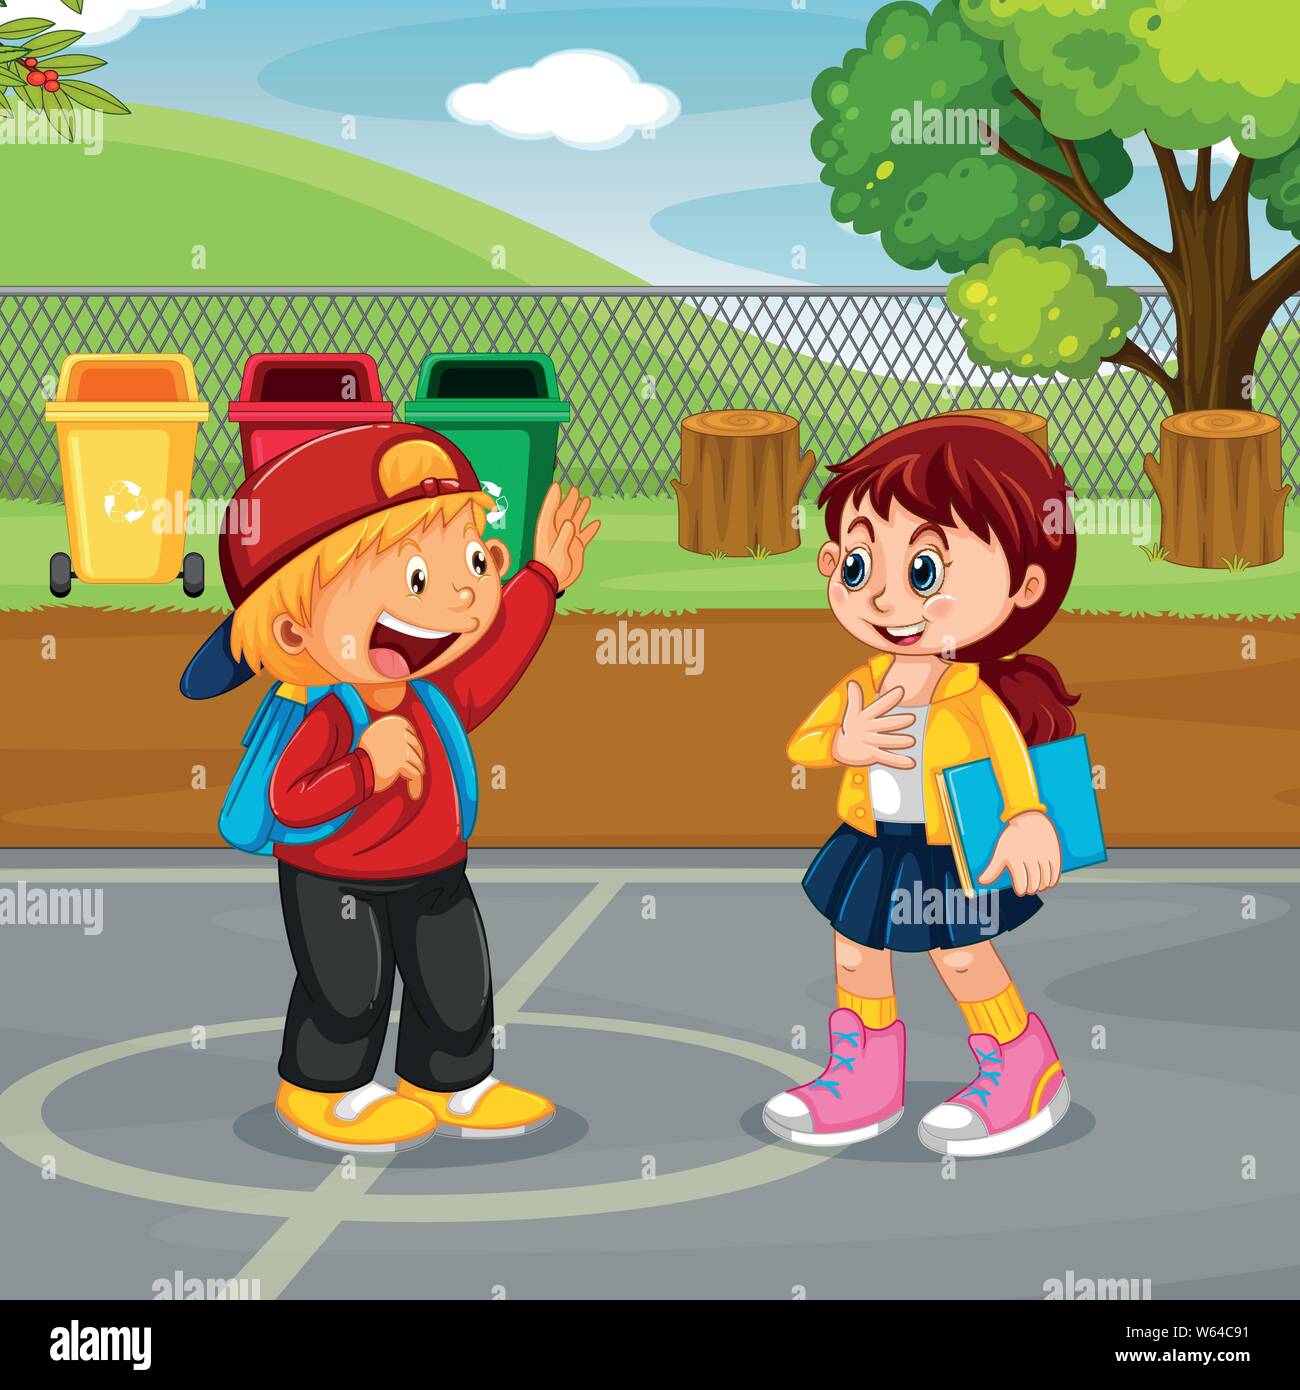 Boy and girl meeting in park illustration Stock Vector